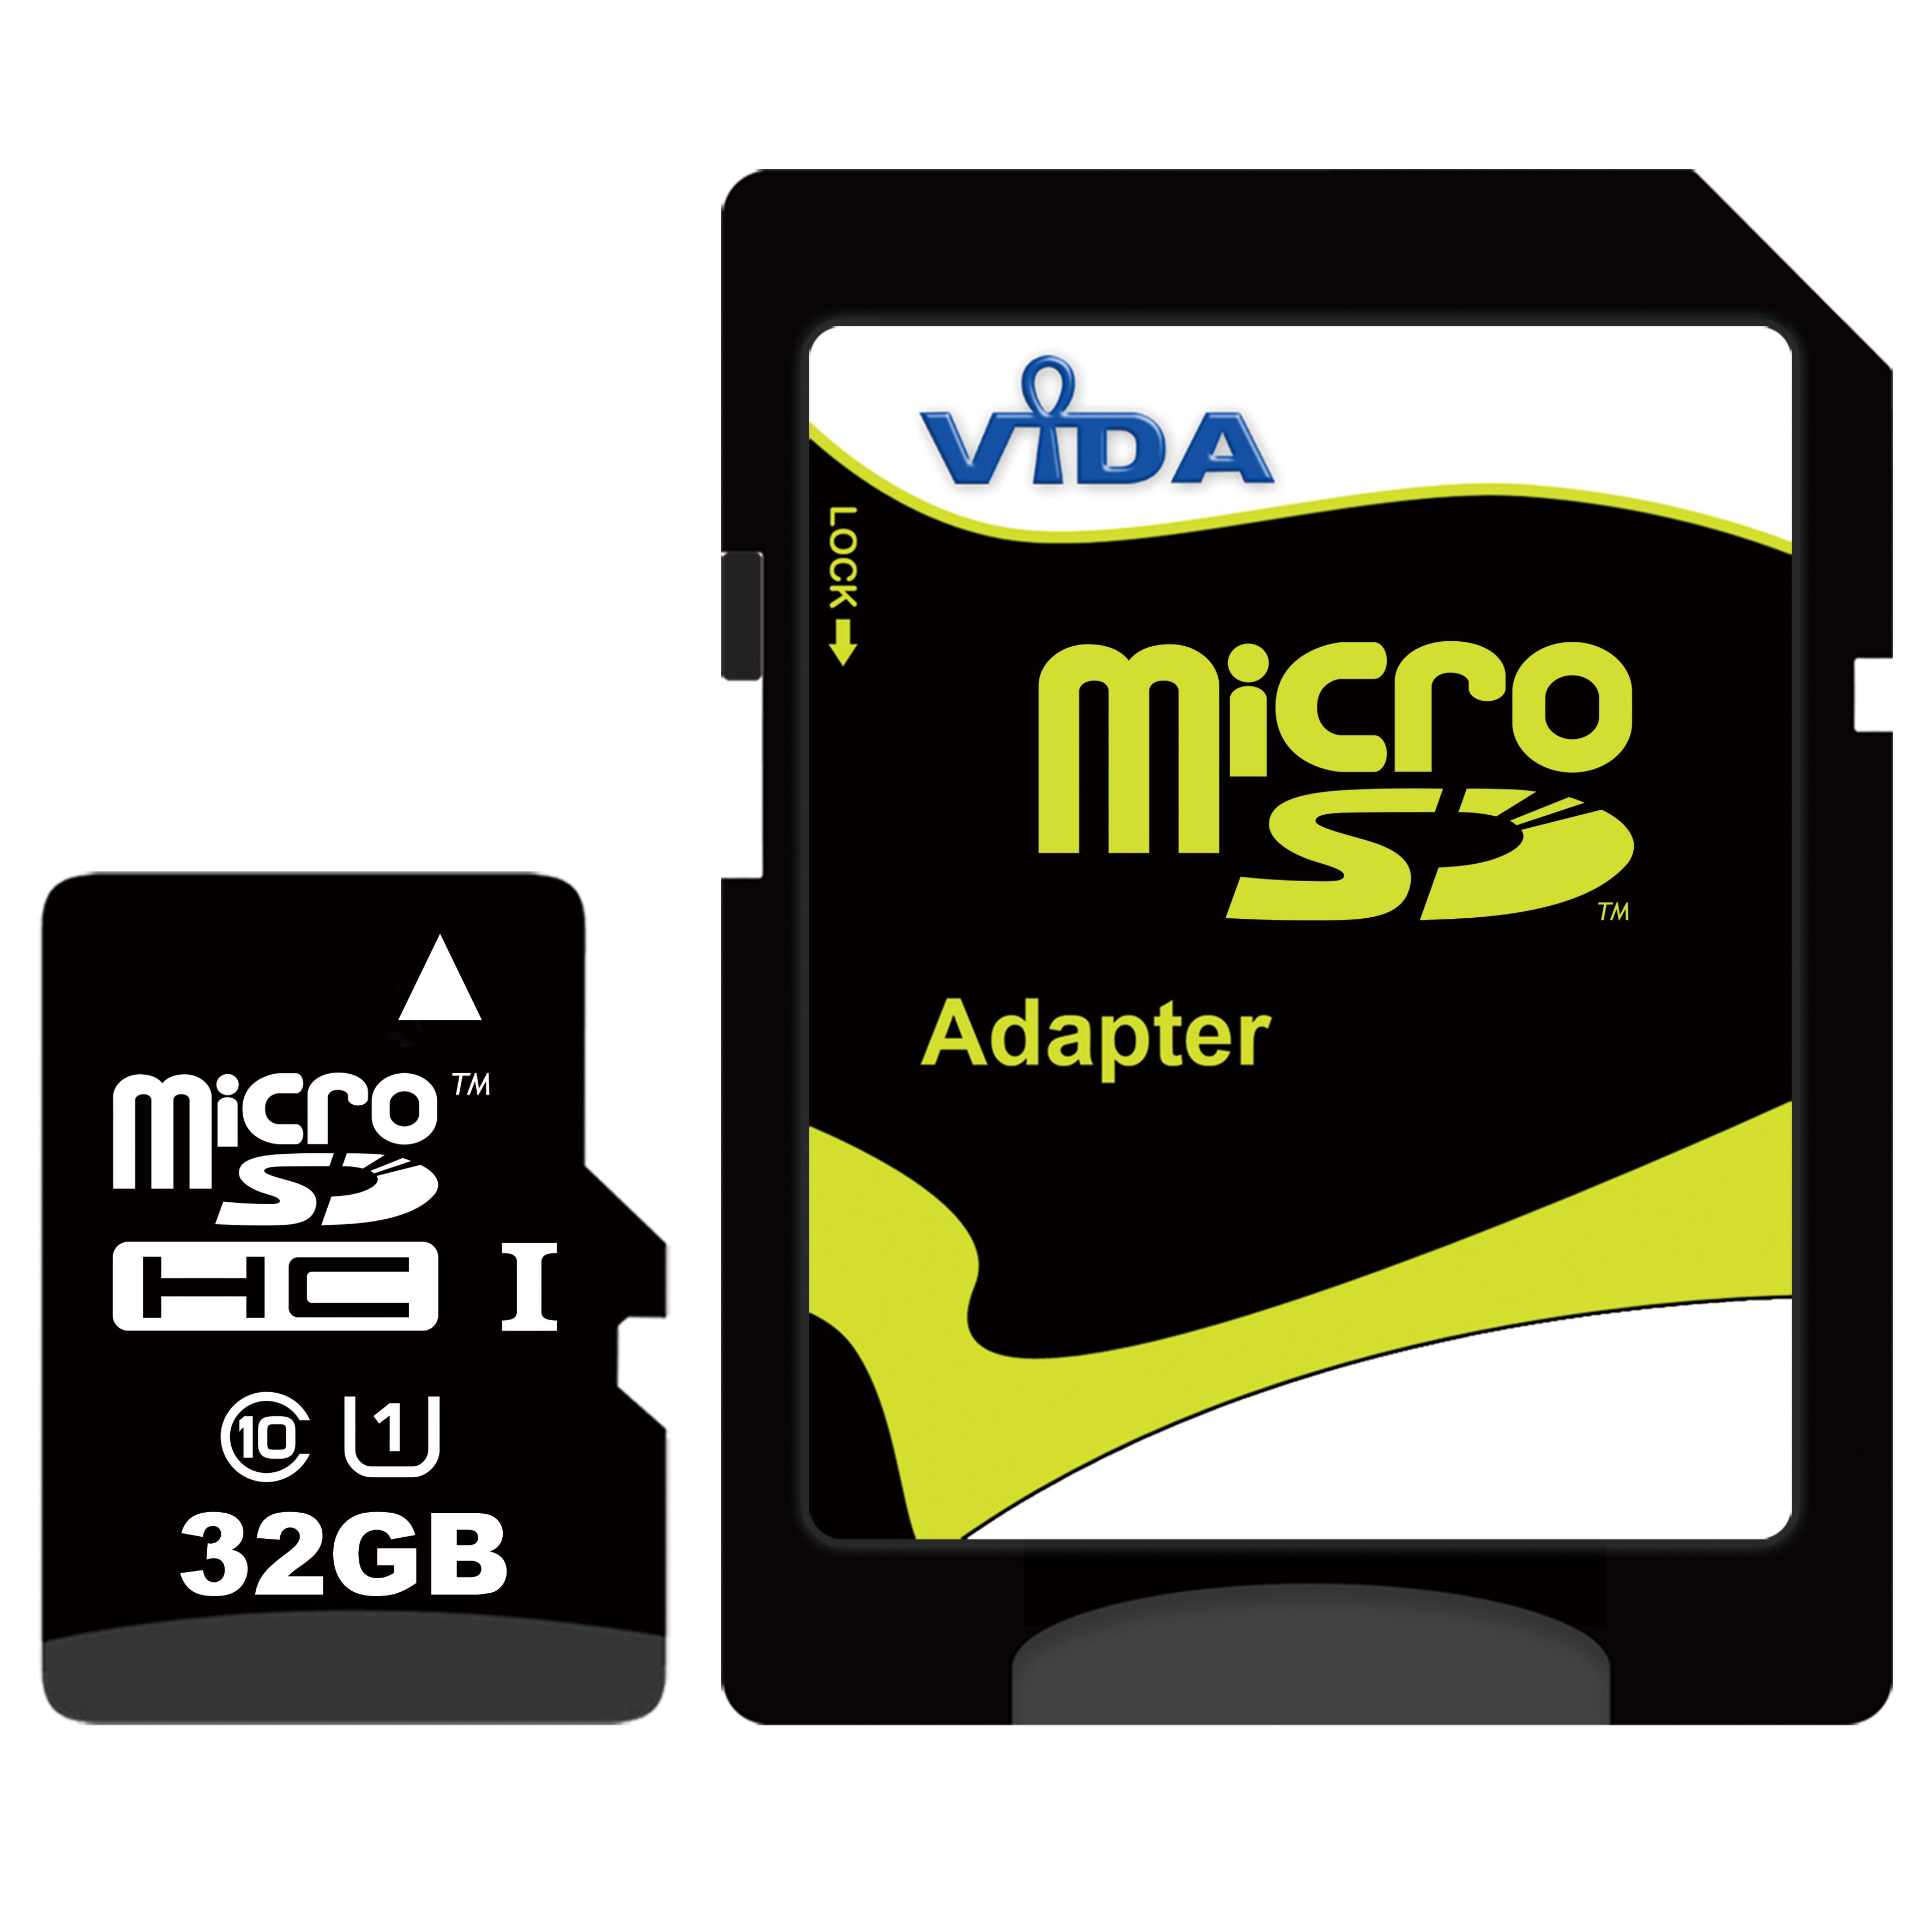 VIDA IT Micro SD SDHC SDXC tf flash memory card with SD Adapter Ultra High-Speed Class 10 UHS-I For mobile phone smartphone GPS camera dashcam camcorder